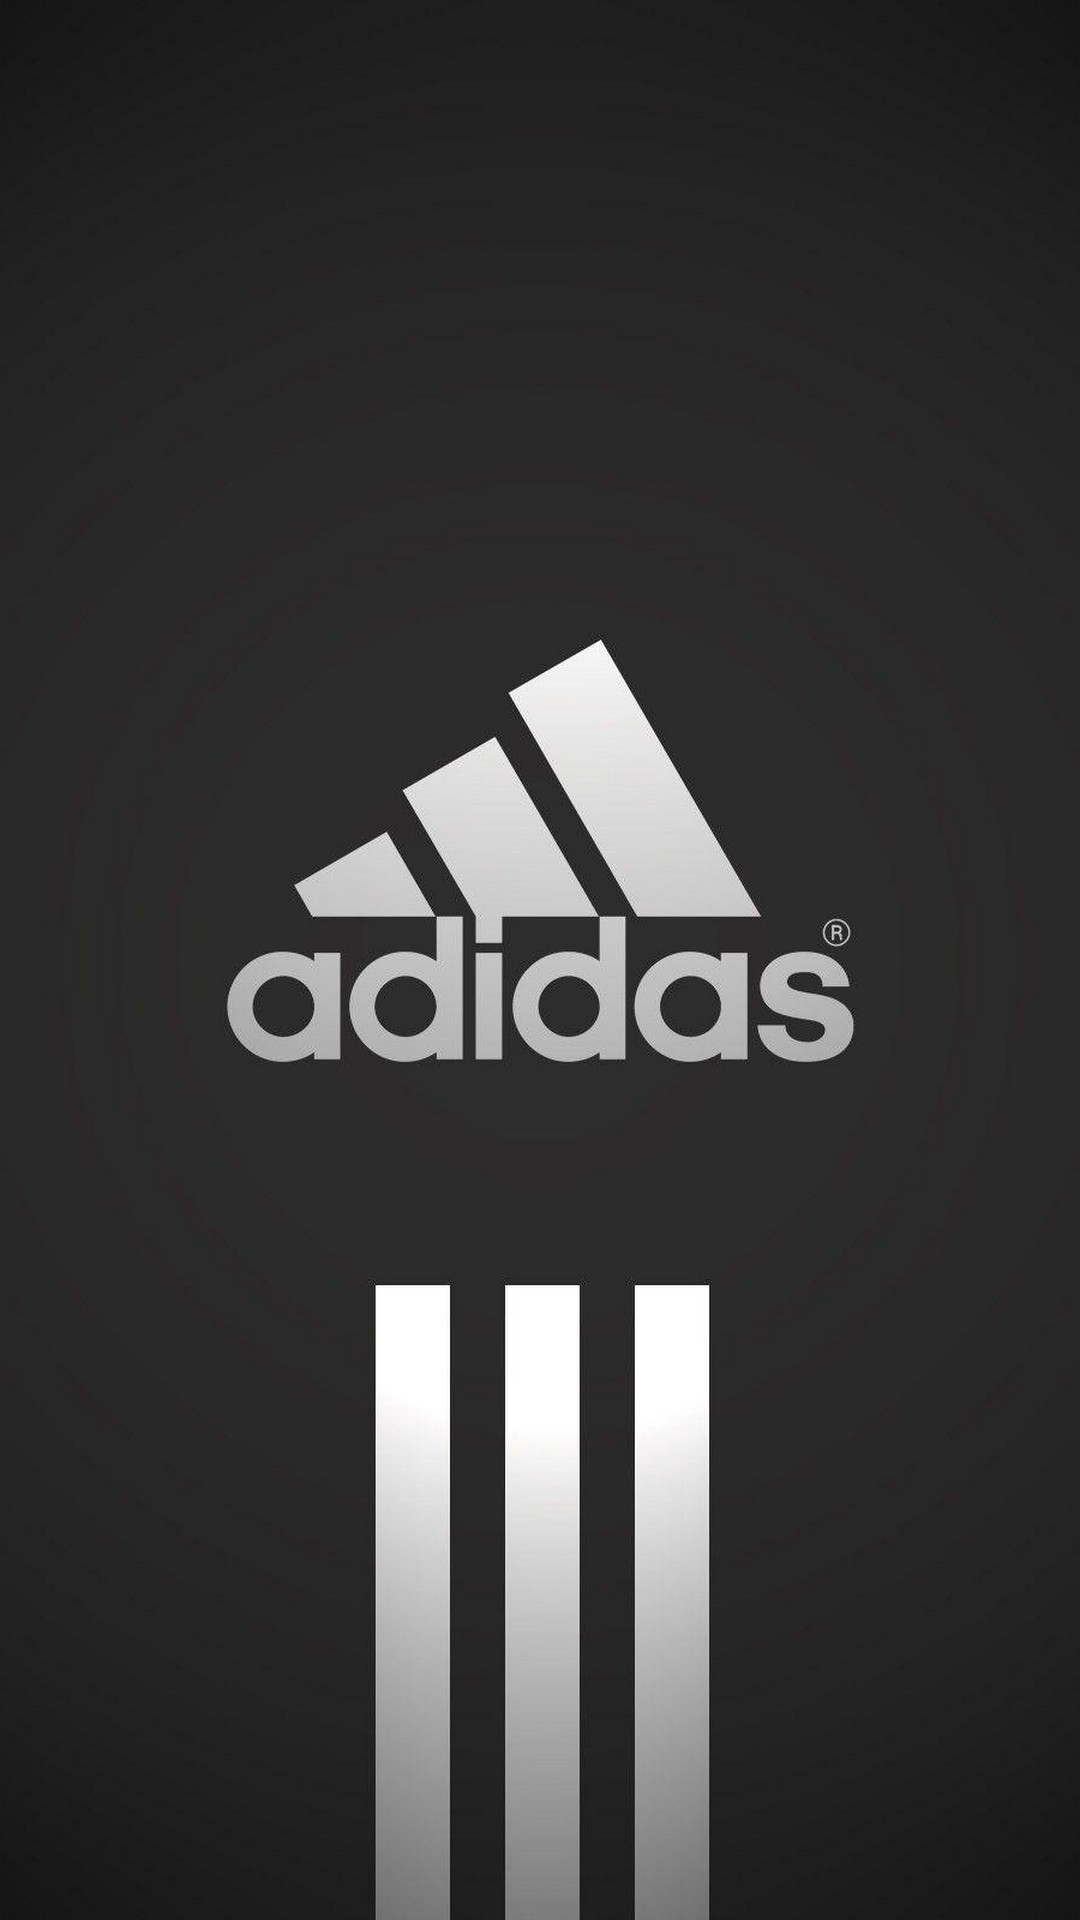 Adidas iPhone 8 Wallpaper With high-resolution 1080X1920 pixel. You can use this wallpaper for your iPhone 5, 6, 7, 8, X, XS, XR backgrounds, Mobile Screensaver, or iPad Lock Screen